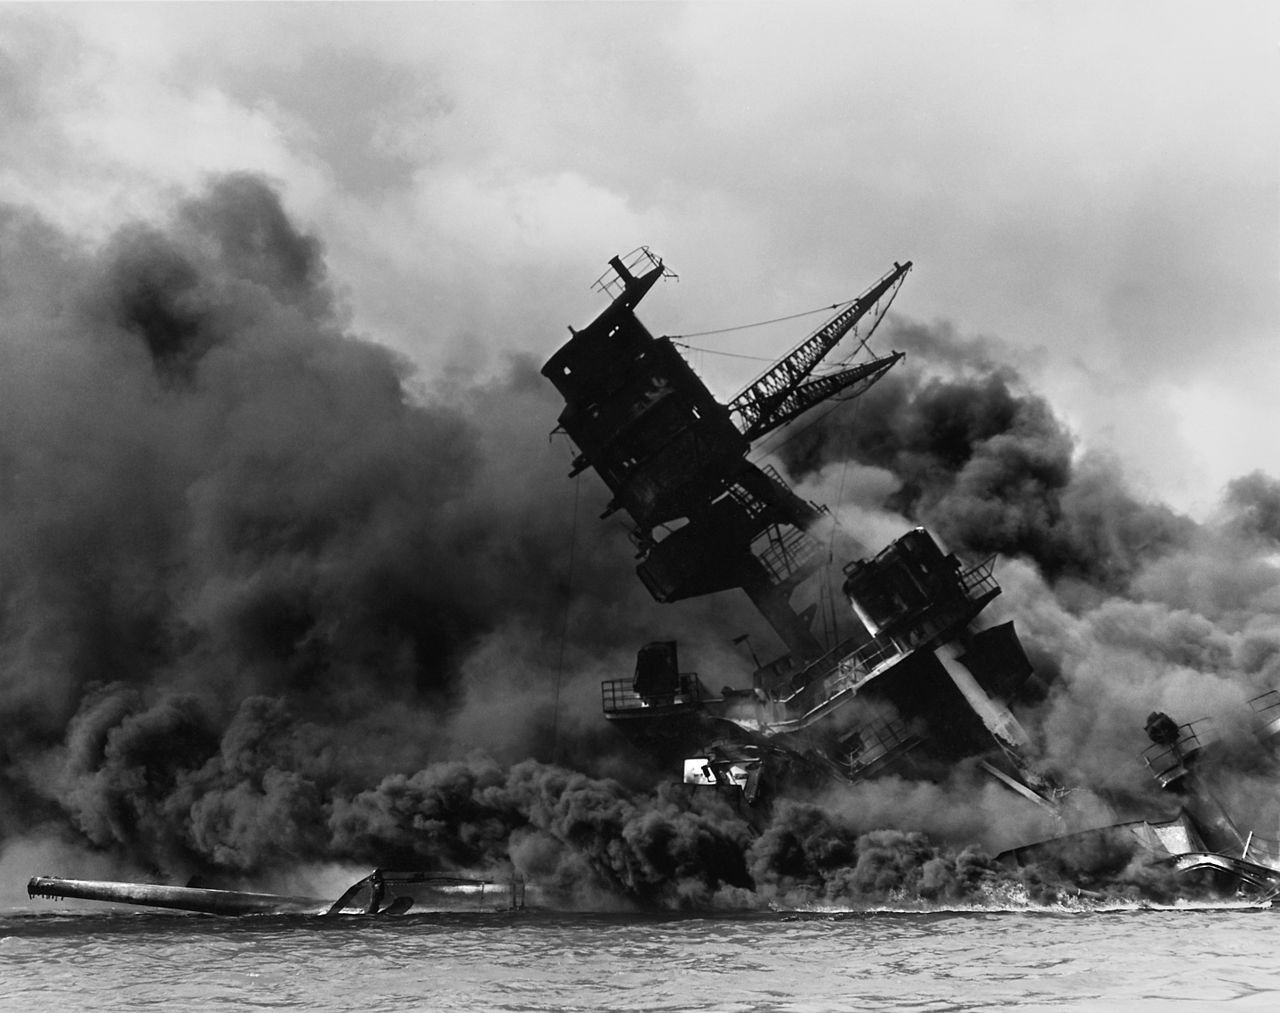 The_USS_Arizona_burning_after_the_attack_on_Pearl_Harbor_7dic1941.jpg